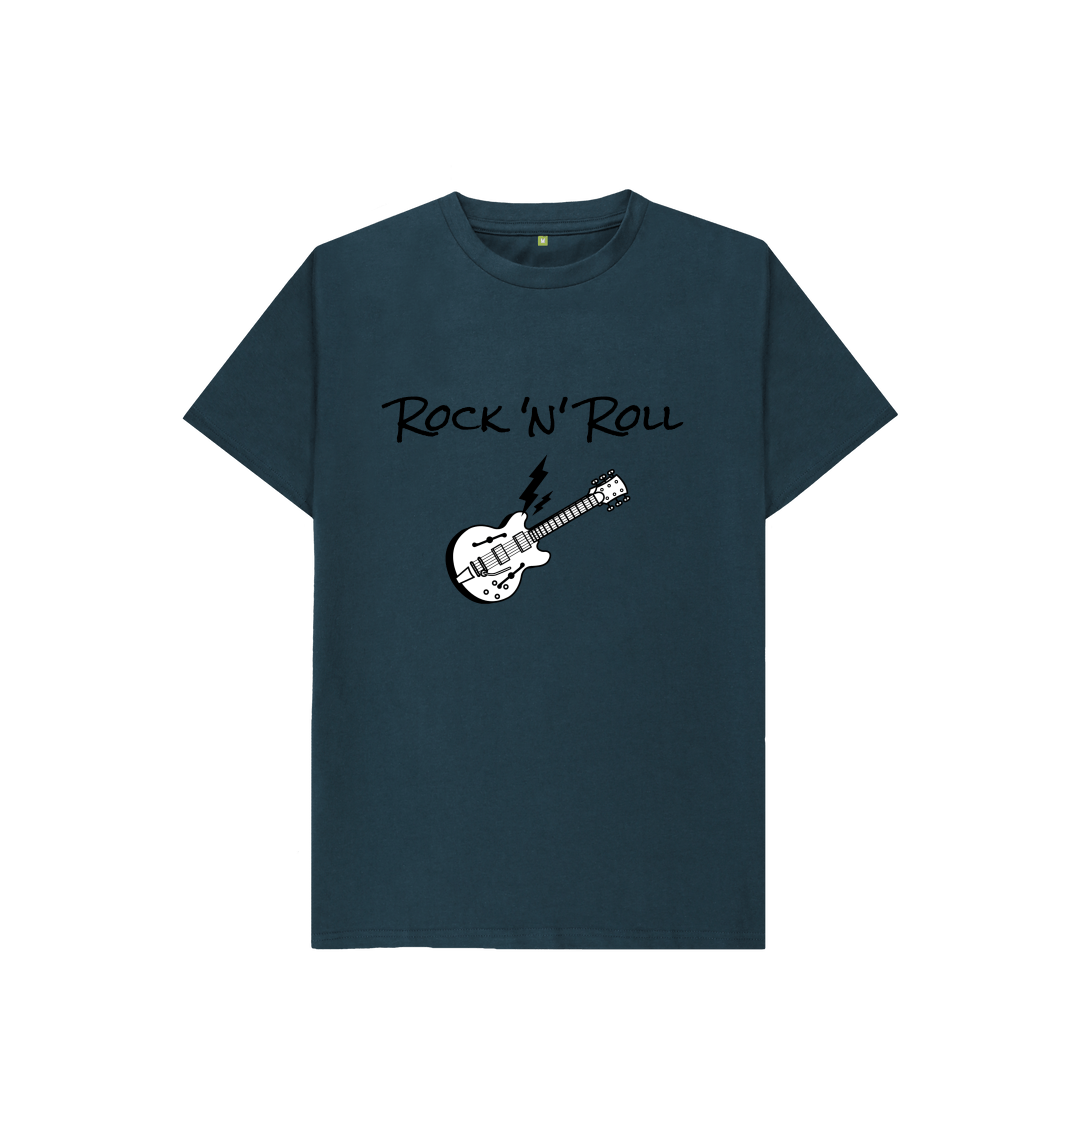 Cat T-shirt gray and white rock'n'roll cat organic cotton unisex